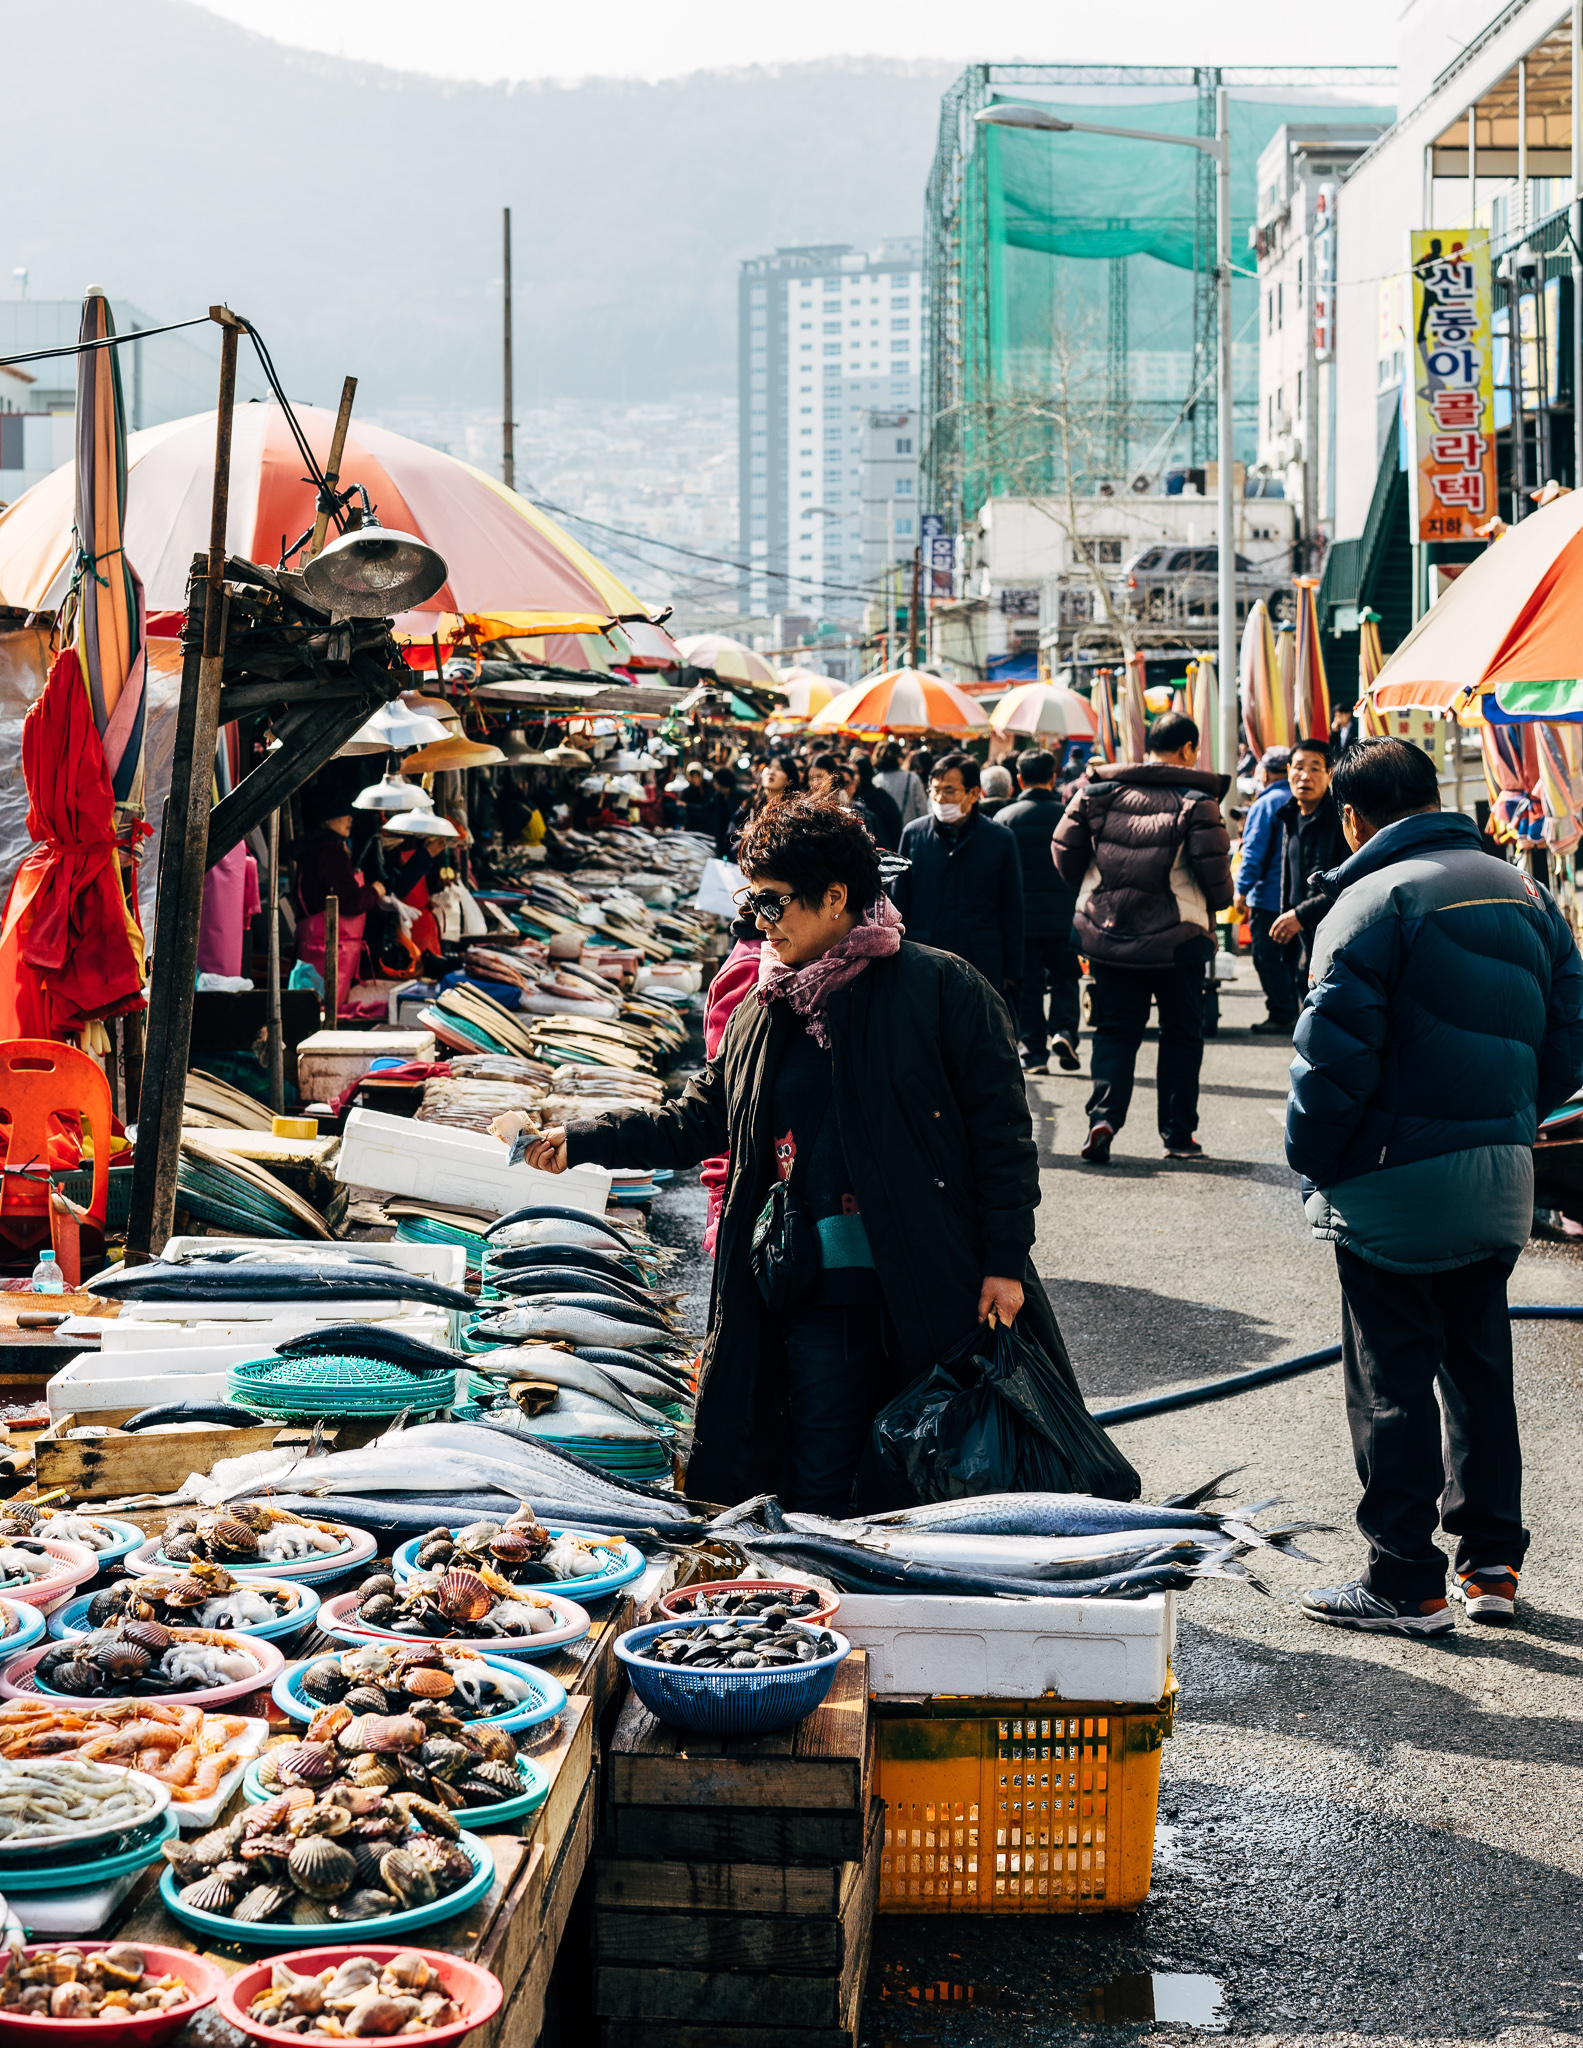 a view of the seafood market in busan, south korea